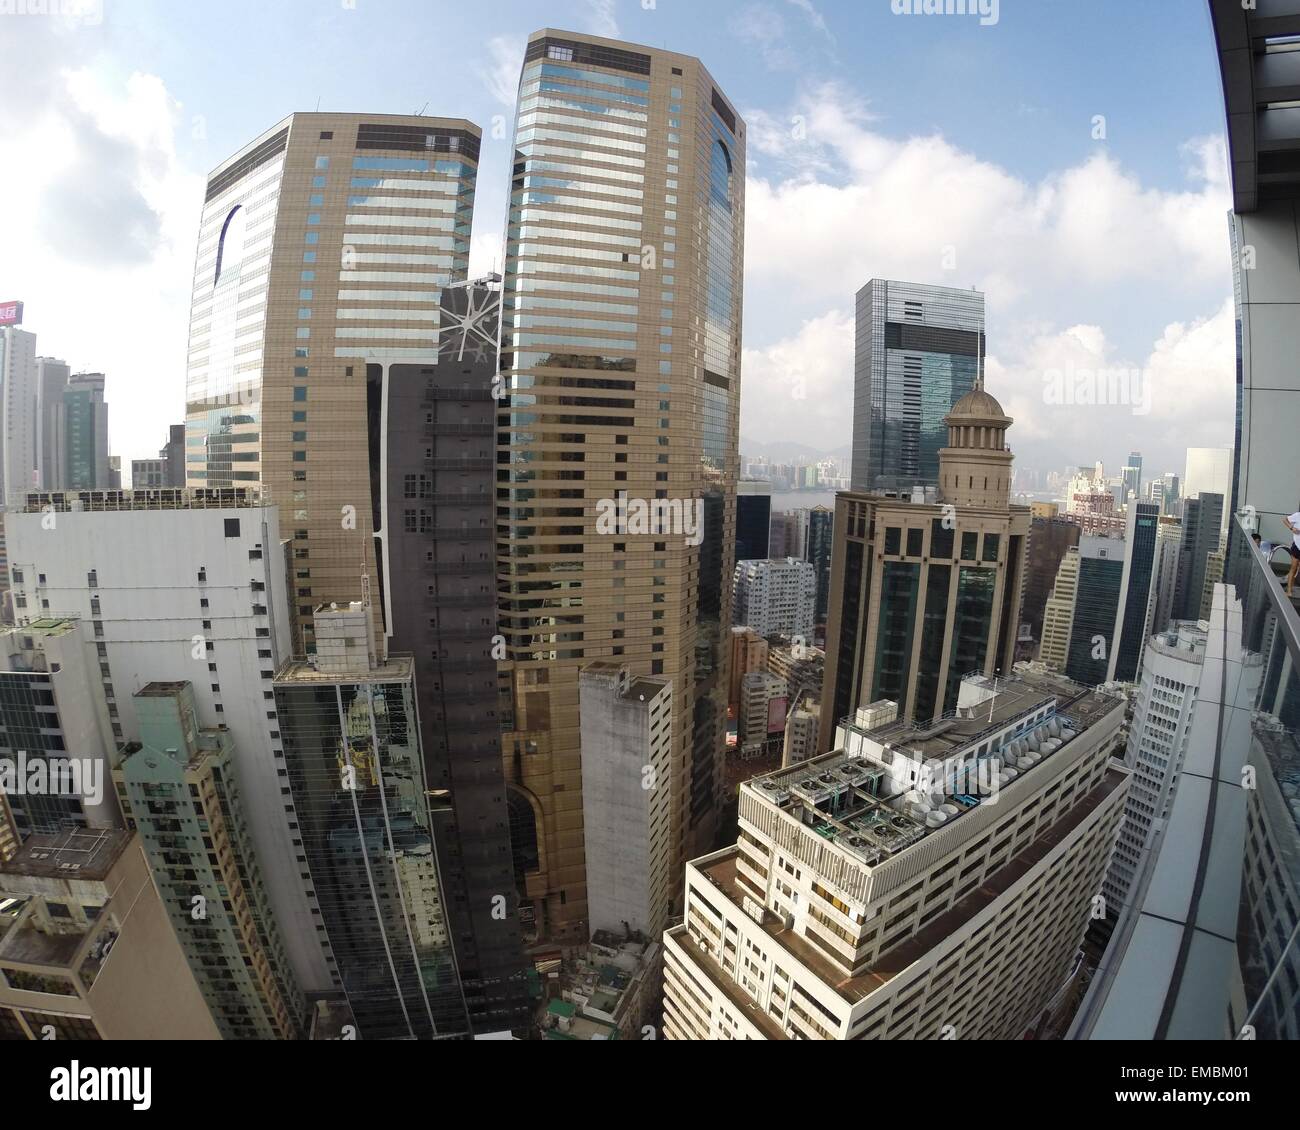 It's a photo of the Hong Kong Skyscrapers view from high and taken with a wide angle camera Stock Photo